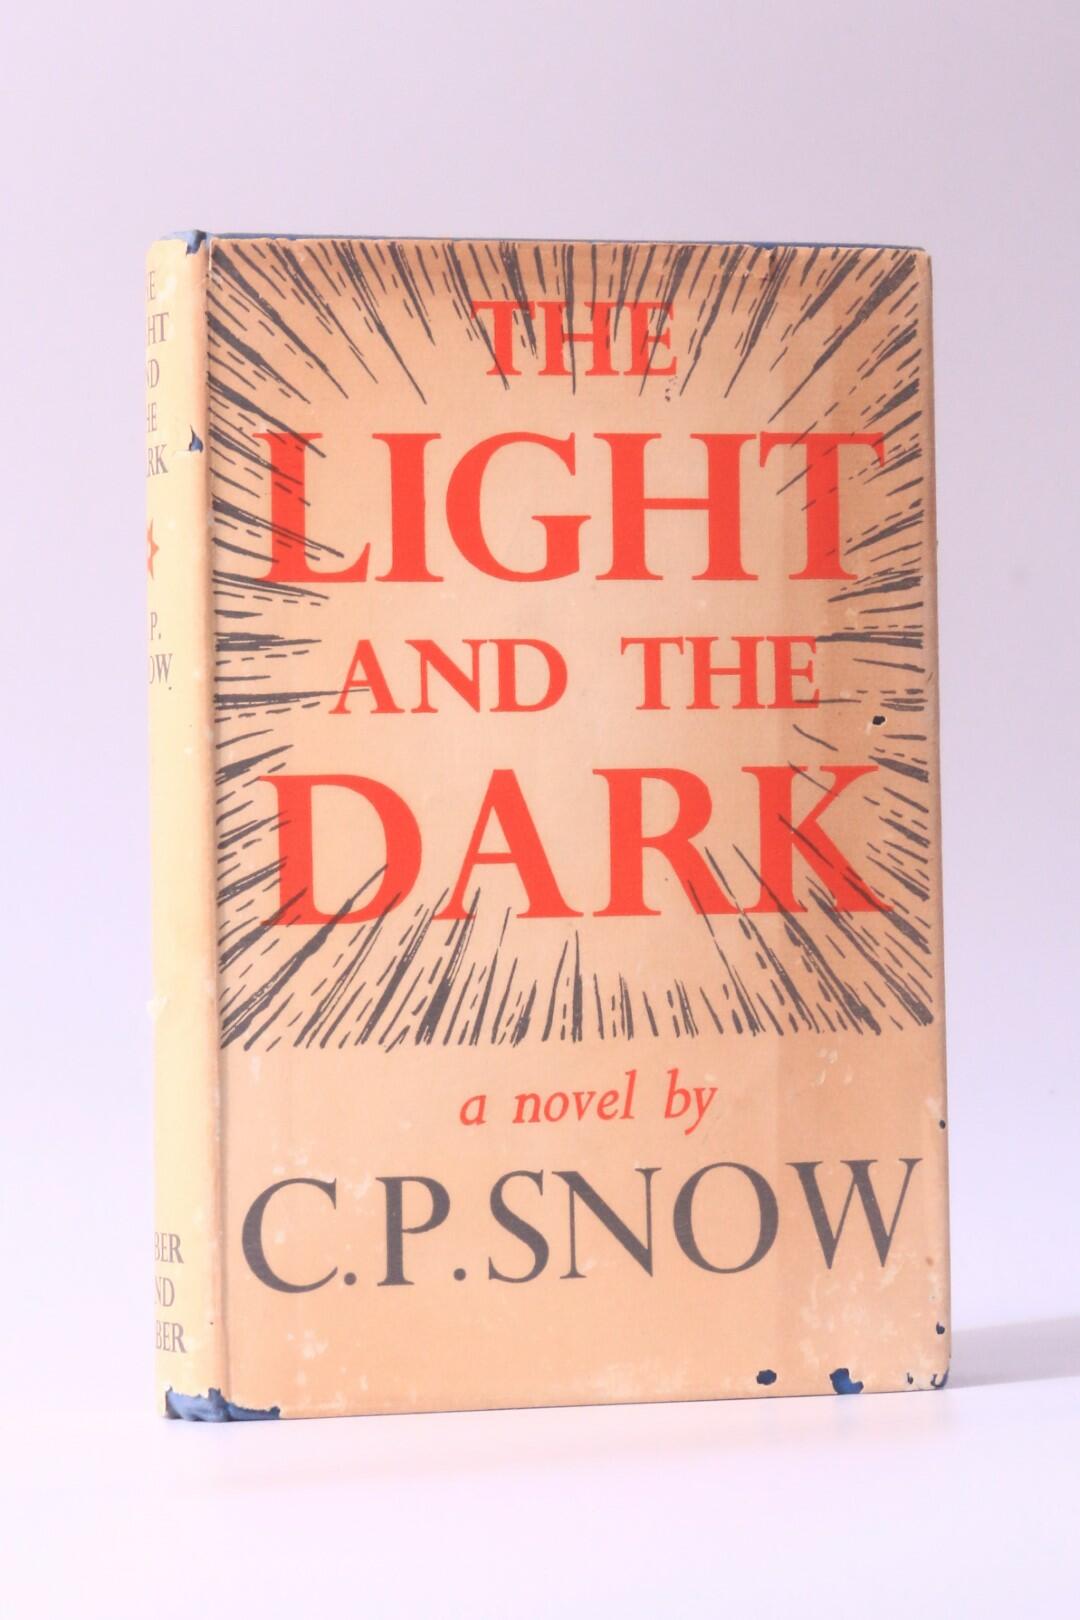 C.P. Snow - The Light and the Dark - Faber, 1947, First Edition.